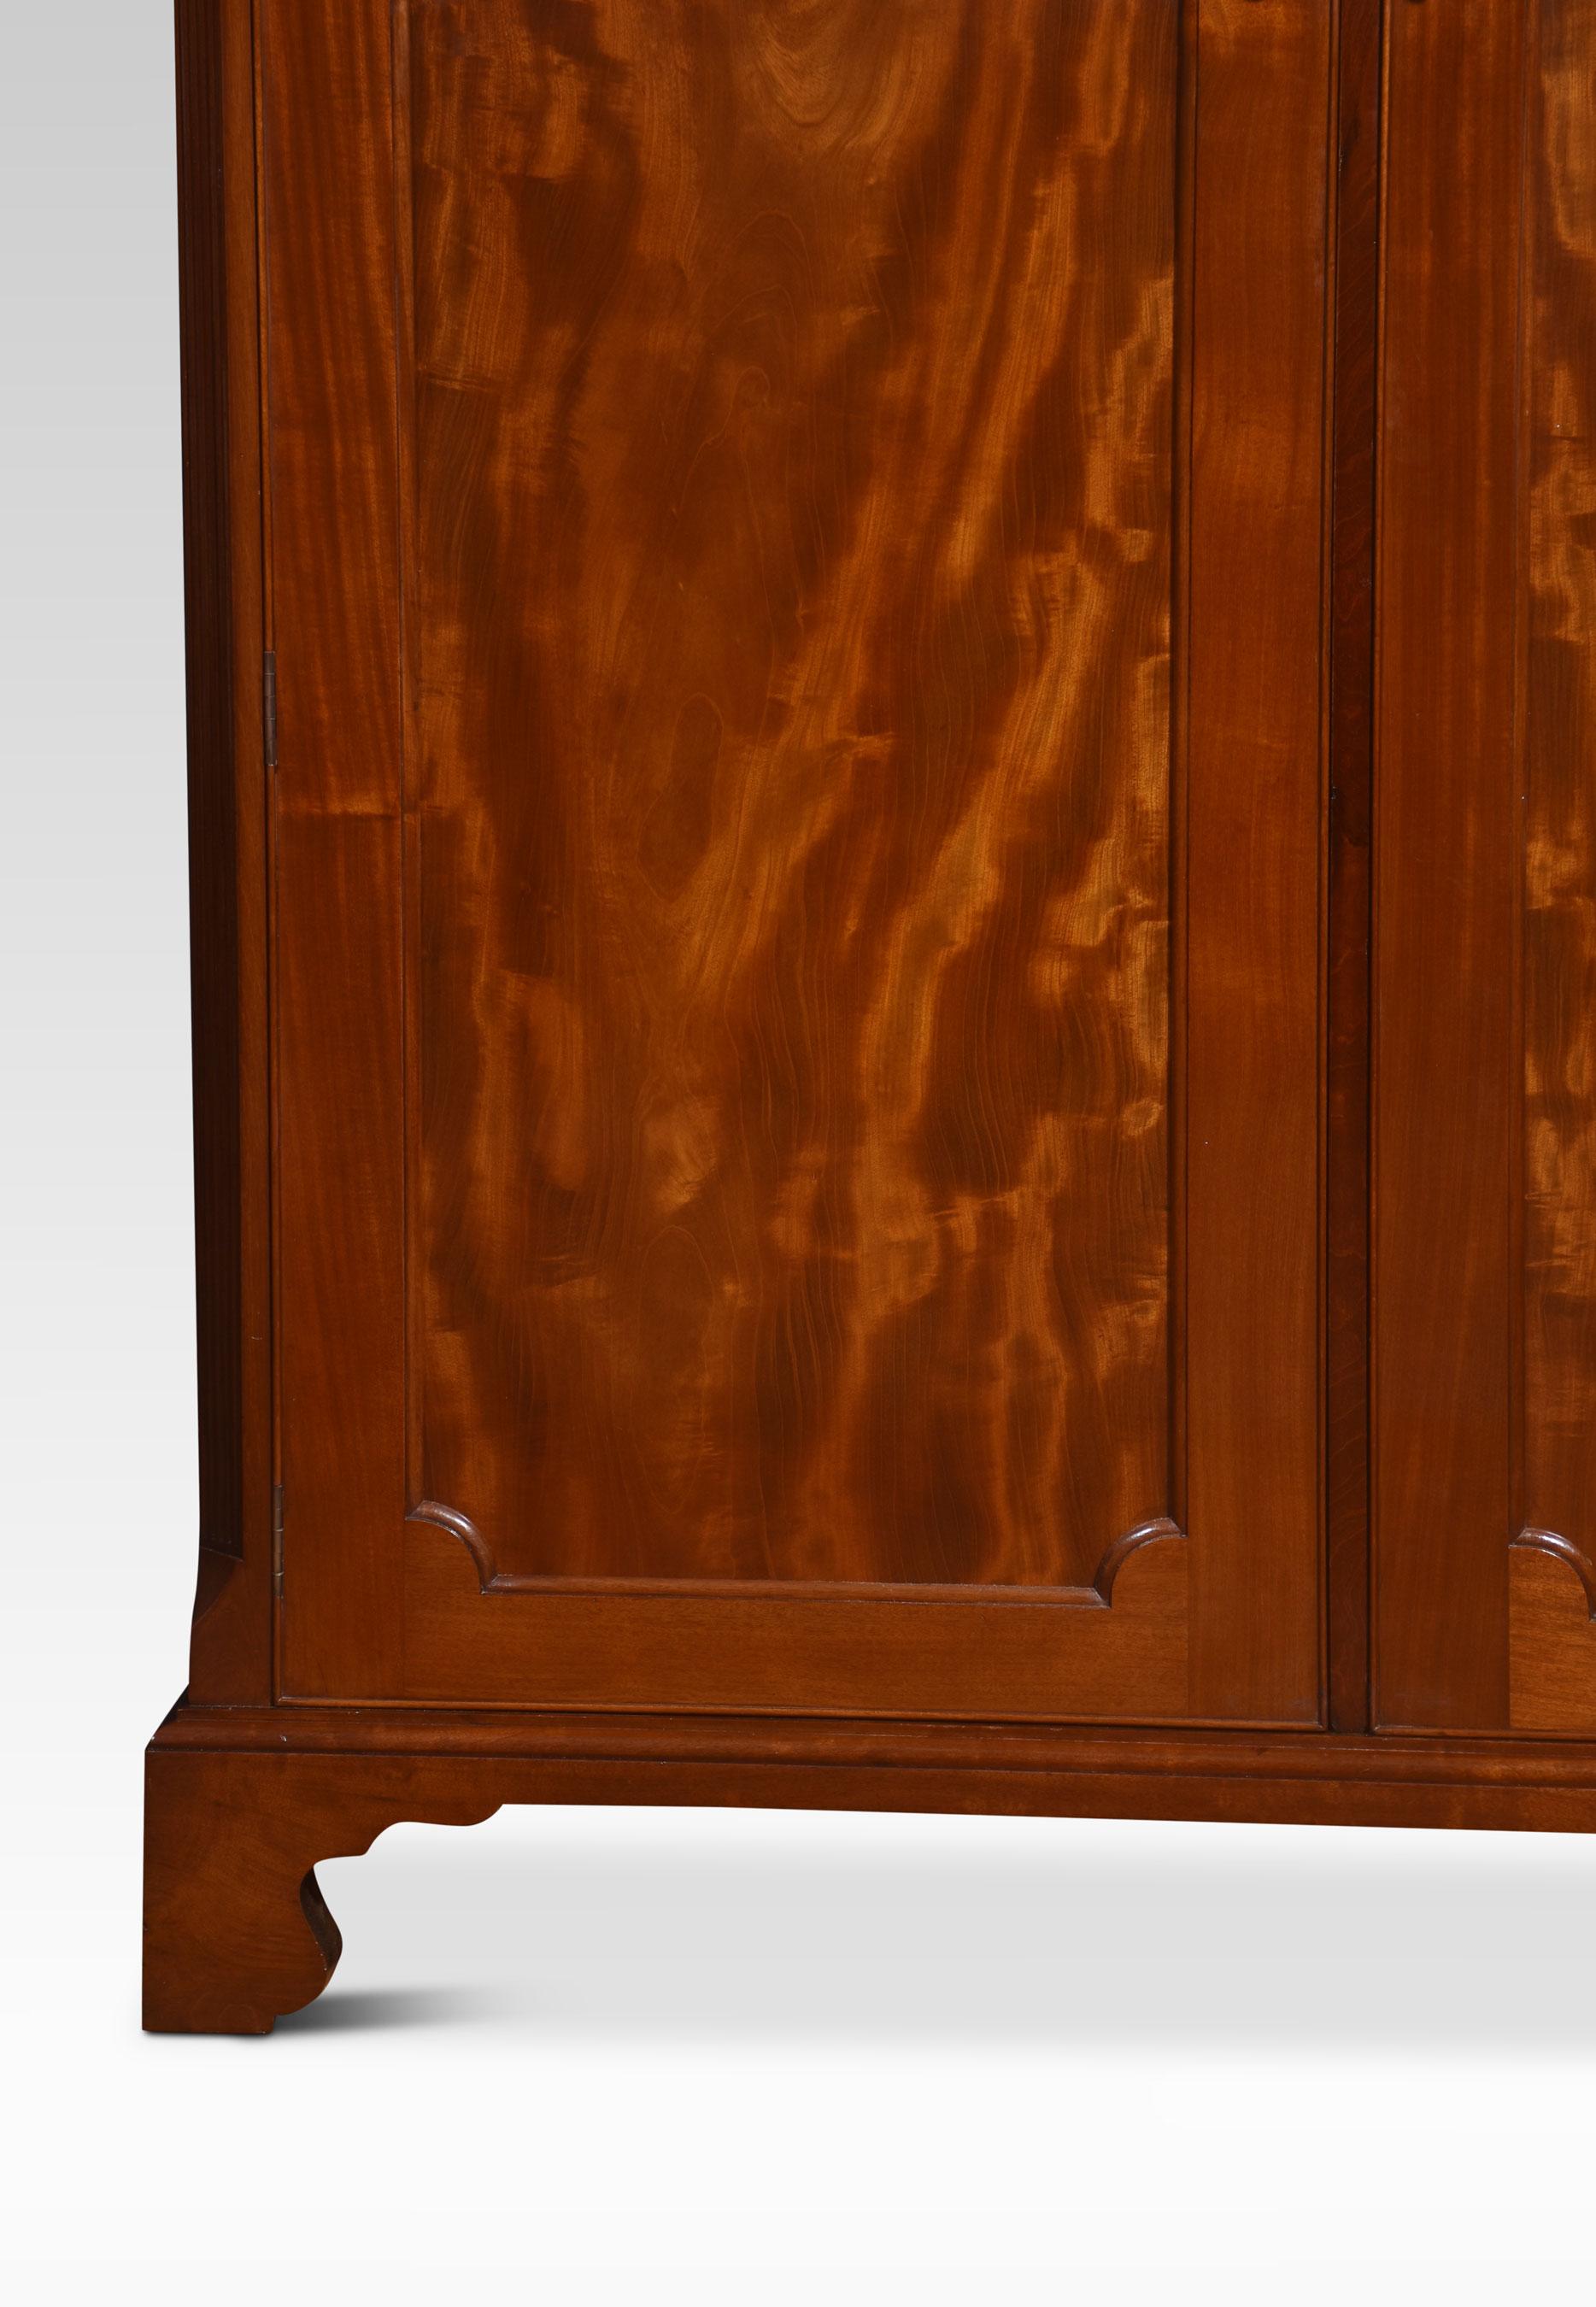 Mahogany wardrobe, the carved moulded cornice above two well figured mahogany panelled doors opening to reveal large hanging area with shelves above. All raised up on bracket feet.
Dimensions
Height 77.5 Inches
Width 53.5 Inches
Depth 26 Inches